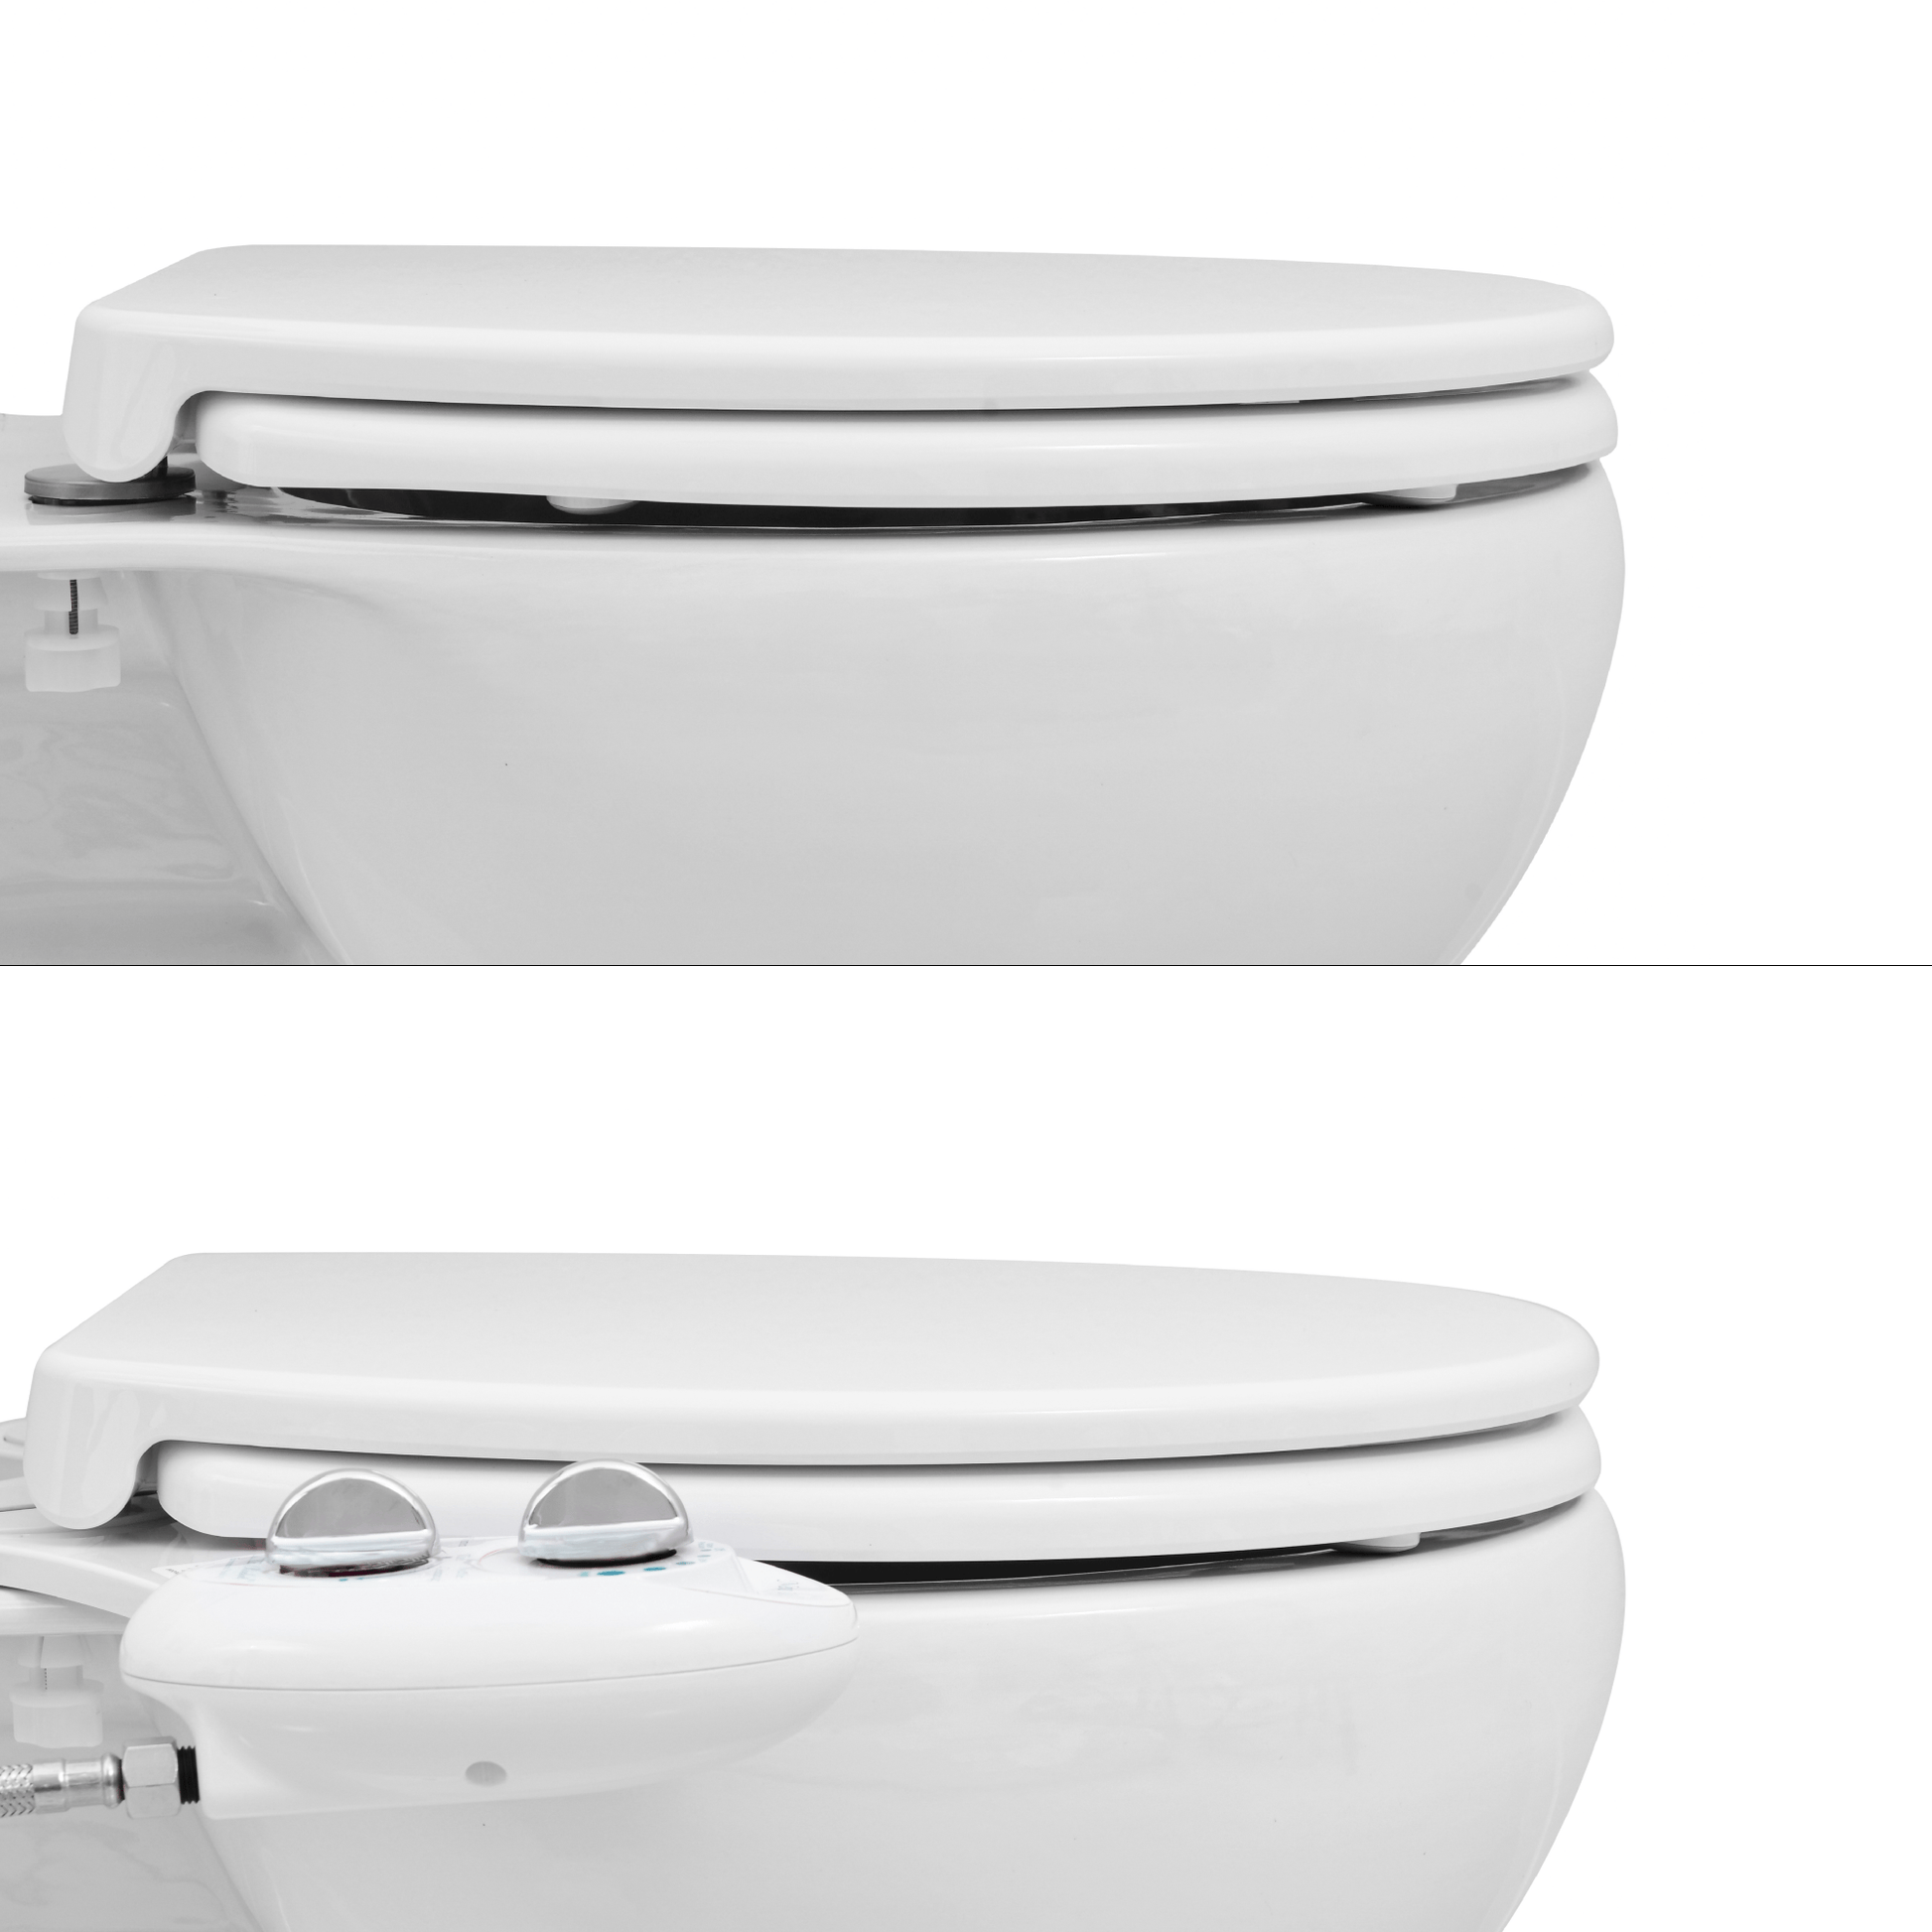 LUXE Comfort Fit Toilet Seat can be installed with and without a bidet for the perfect fit